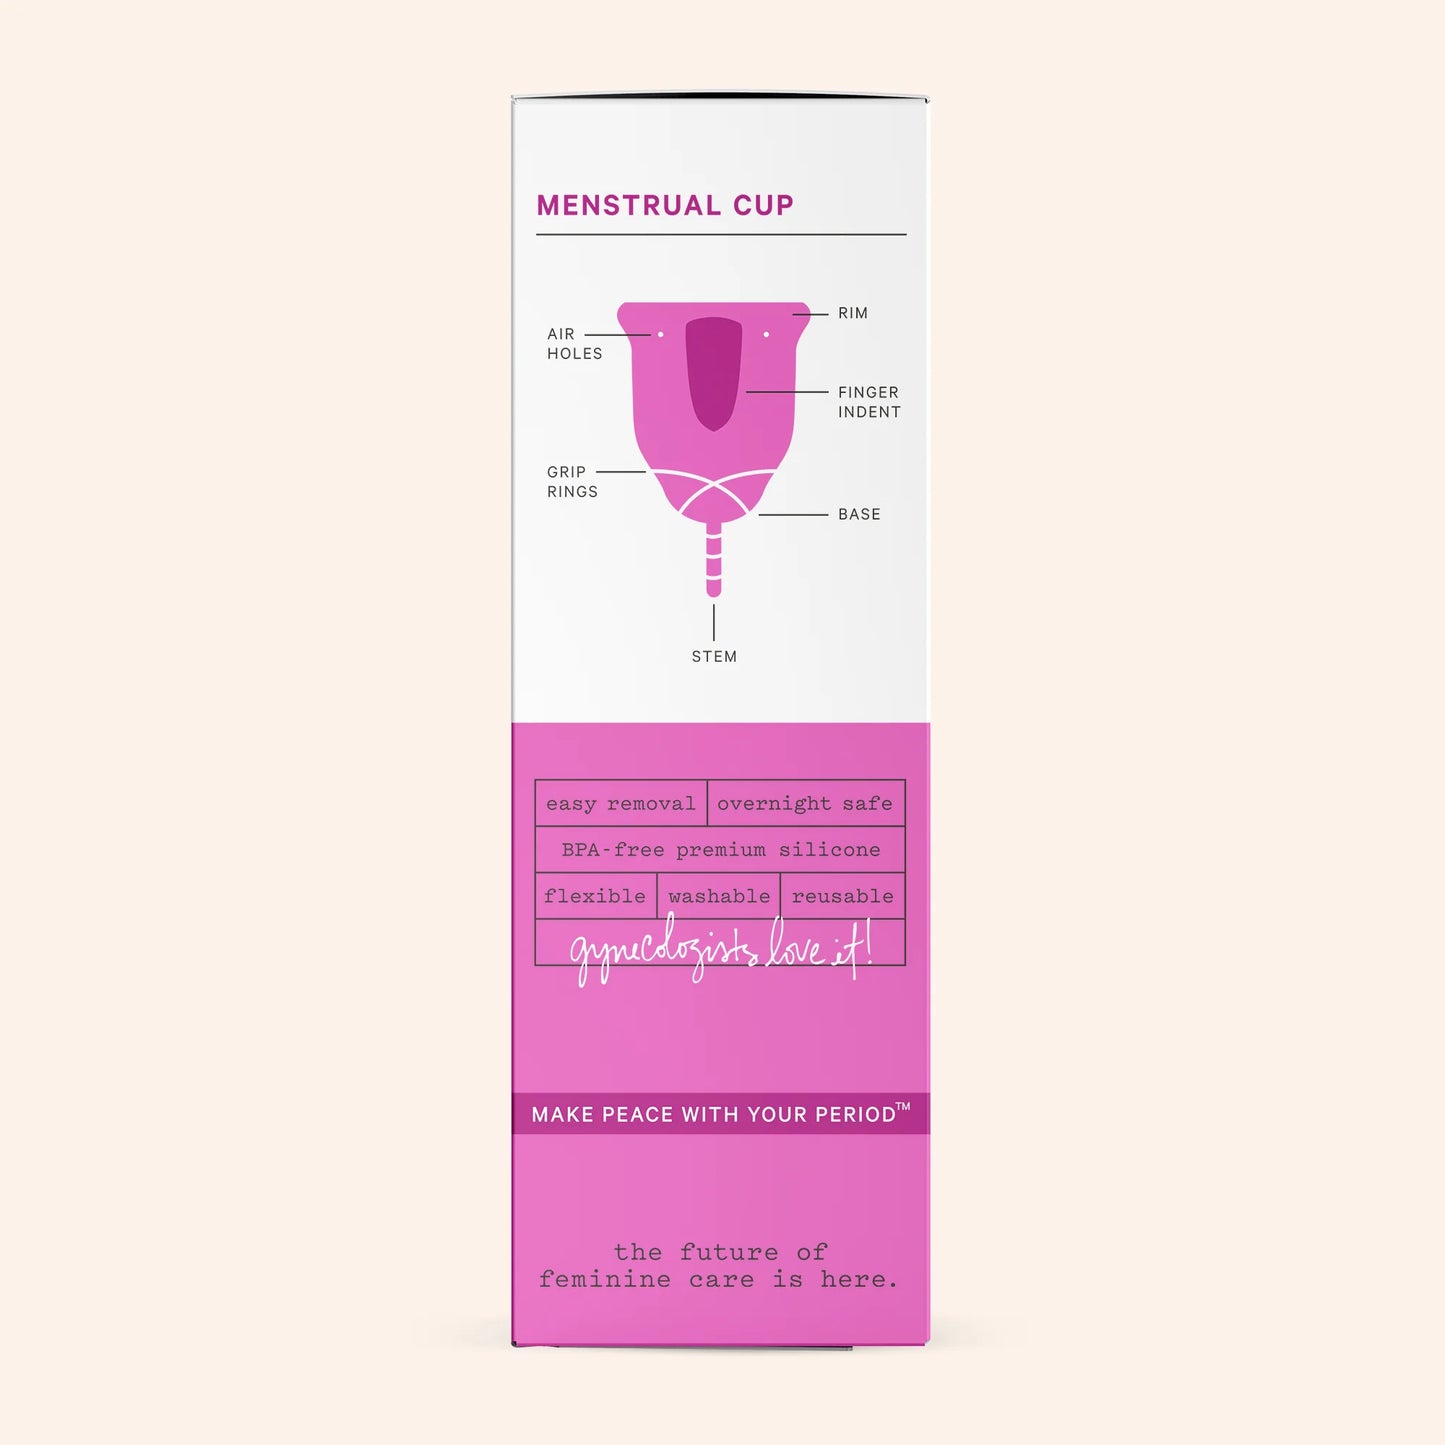 The Honey Pot - Silicone Menstrual Cup